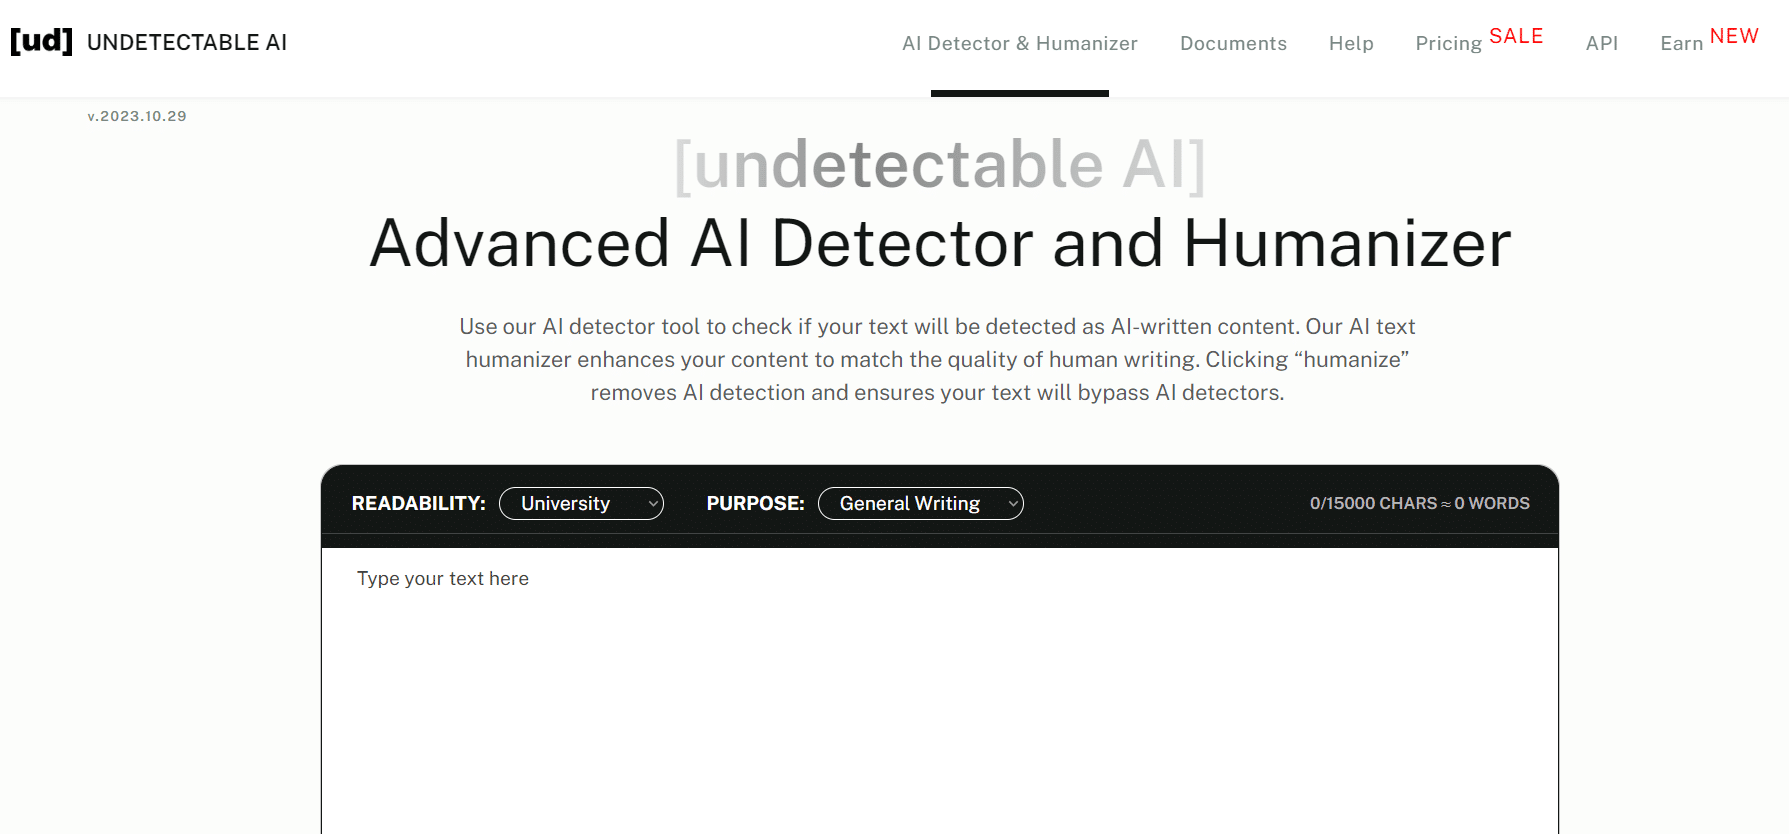 Undetectable AI